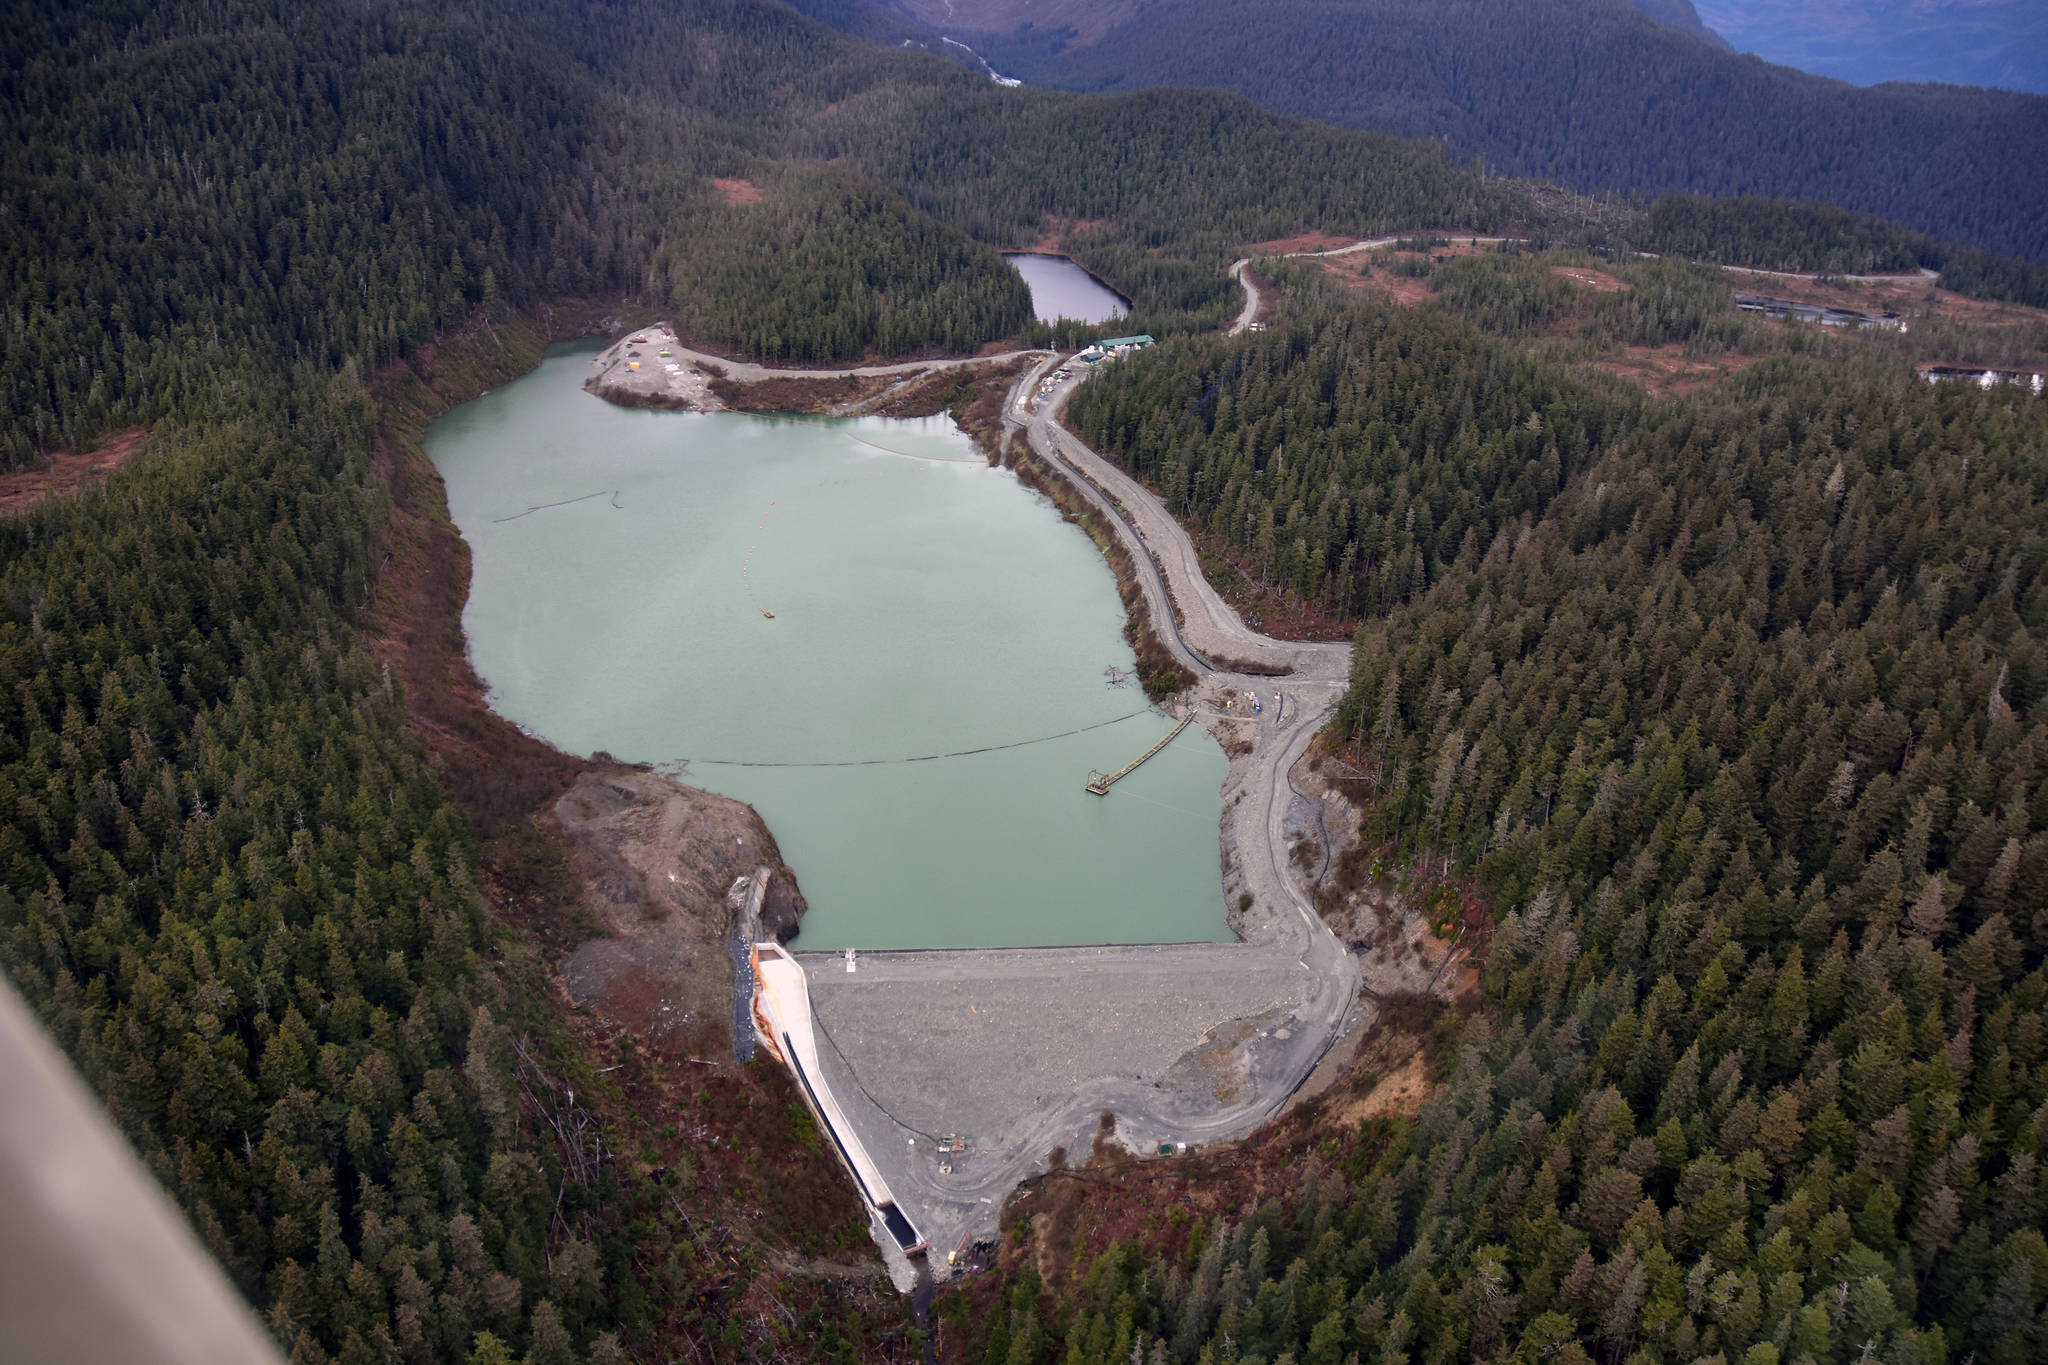 The Tailing Treatment Facility and Upper Slate Lake at the Kensington Mine on Monday, Oct. 14, 2019. Coeur Alaska wants to expand the life of the mine which will require expanding this lake which holds processed material from the mine. The lake has its own water treatment plant which continually processes wastewater. The company says it follows the strictest environmental precautions. (Peter Segall / Juneau Empire)